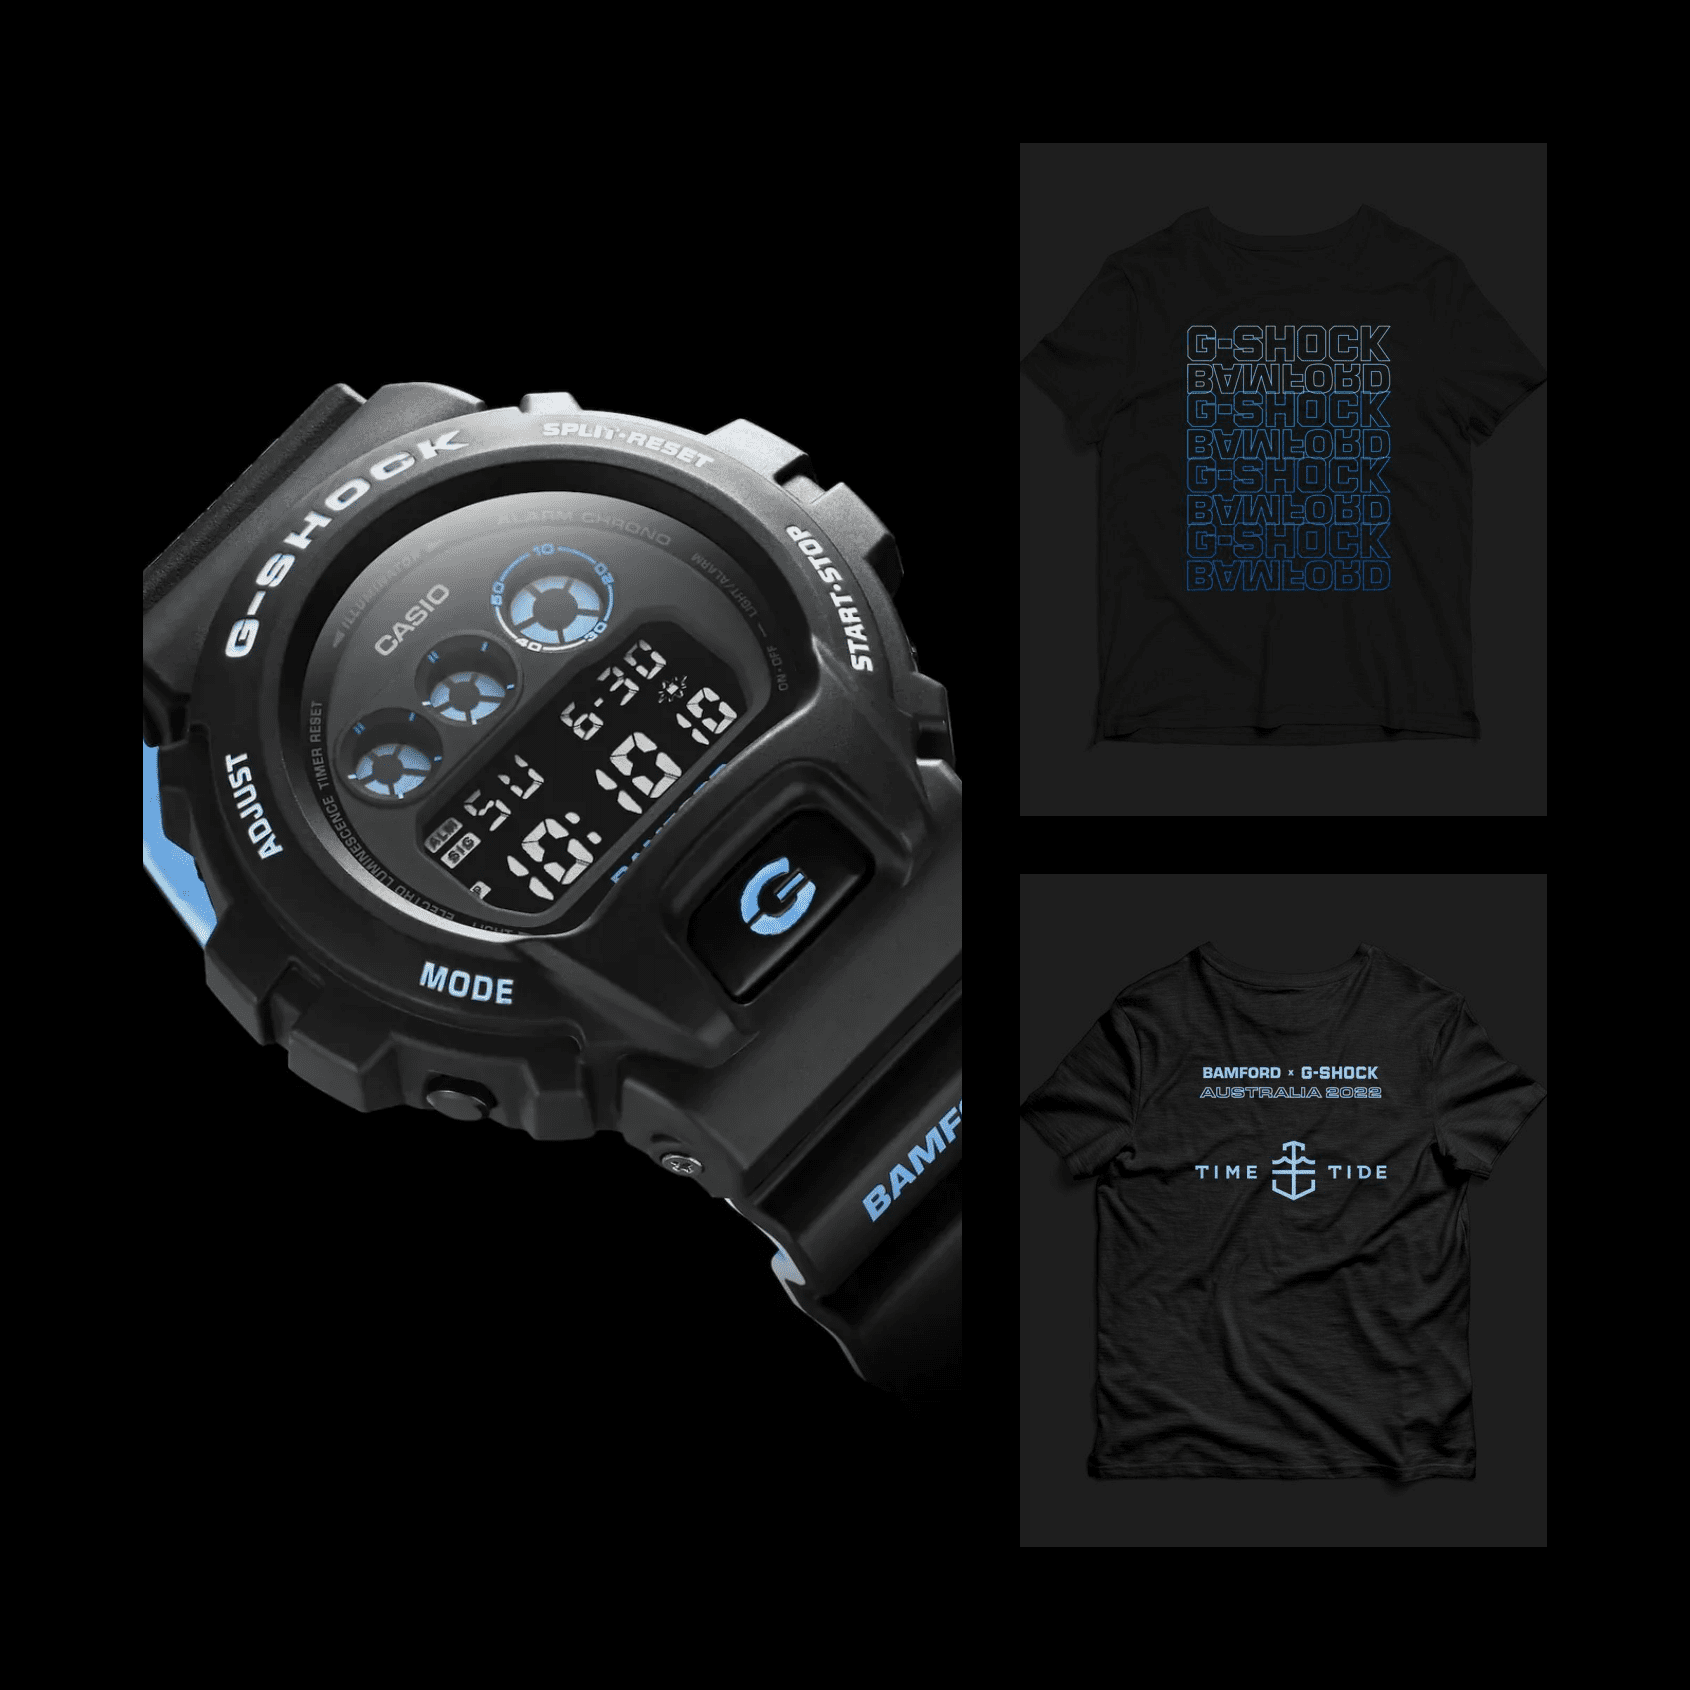 FRIDAY WIND DOWN: If you want to buy the new Bamford G-Shock right now, you’d better read this quick…